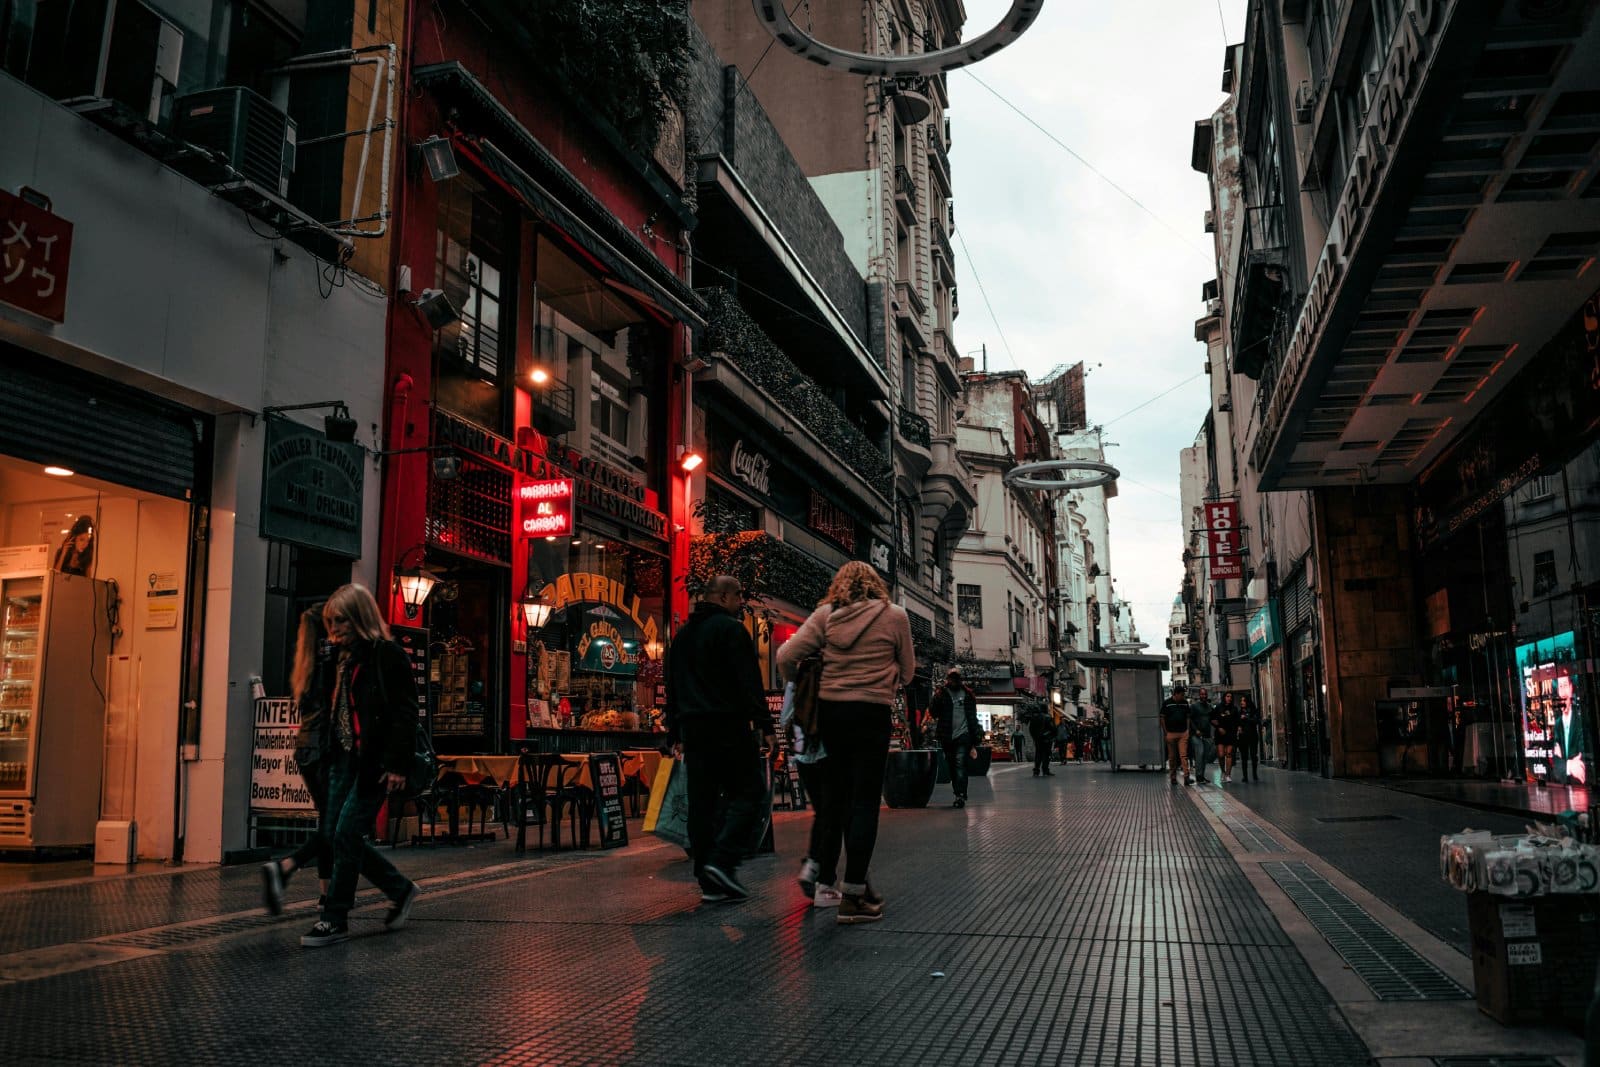 Image Credit: Pexels / Wesley Souza <p><span>As the first Latin American city to legalize same-sex marriage, Buenos Aires is a beacon of LGBTQ+ rights in the region. The city’s LGBTQ+ nightlife is concentrated in the Palermo and San Telmo neighborhoods, offering many bars, clubs, and cultural events. Buenos Aires Pride takes place in November, celebrating the community with a parade through the heart of the city. Additionally, the Argentine capital is renowned for its tango culture, which includes LGBTQ+-friendly milongas (tango dance events) where visitors can experience the country’s iconic dance in an inclusive environment.</span></p> <p><b>Insider’s Tip: </b><span>Attend a queer tango class or milonga for an authentic Buenos Aires experience that breaks traditional gender roles in tango dancing.</span></p> <p><b>When to Travel: </b><span>November for Buenos Aires Pride offers warm spring weather and a series of cultural events celebrating the LGBTQ+ community.</span></p> <p><b>How to Get There: </b><span>Ministro Pistarini International Airport (Ezeiza) serves as the main gateway to Buenos Aires, with the city center accessible via taxi, shuttle, or public bus.</span></p> <p><span>This guide continues to explore the diversity of LGBTQ+ friendly travel destinations, each offering its own unique set of attractions, events, and community spaces. Whether seeking the vibrant nightlife of Berlin, the sunny beaches of Sydney, or the historic charm of Copenhagen, LGBTQ+ travelers can find welcoming destinations that cater to a wide range of interests and preferences.</span></p>